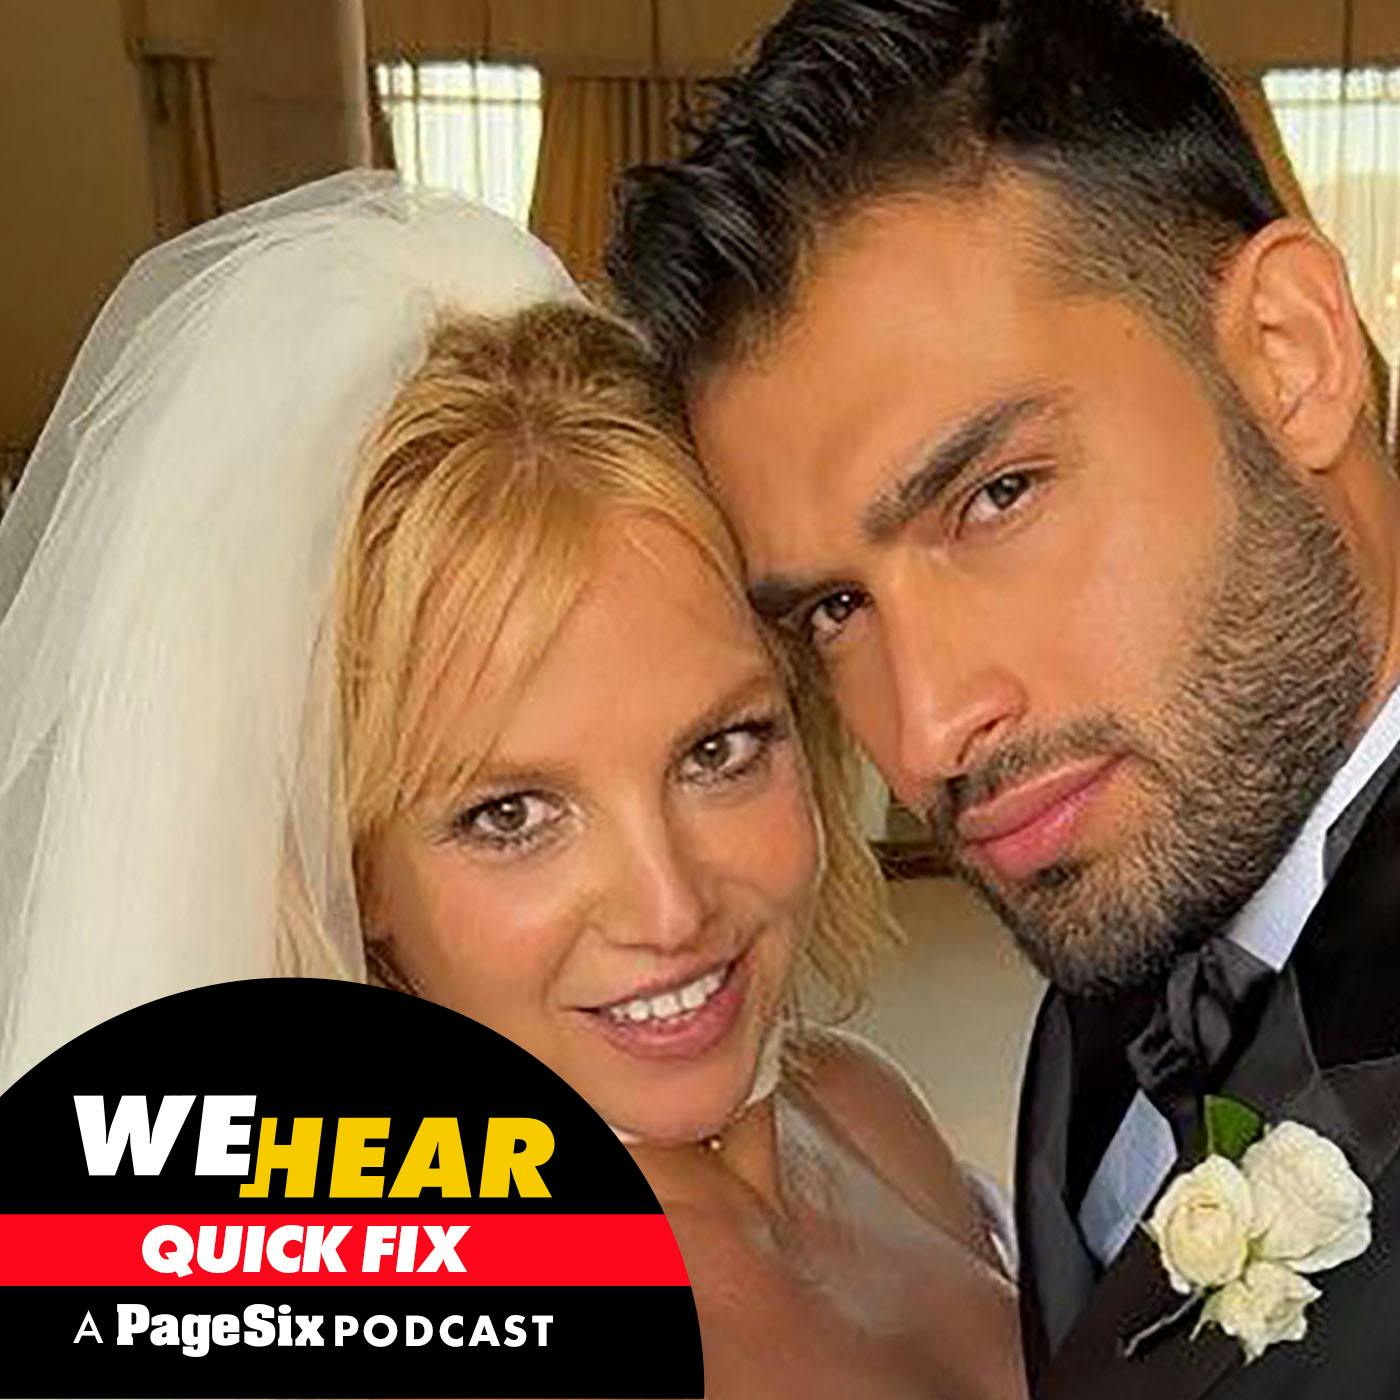 Britney Spears and Sam Asghari are married, Rebel Wilson comes out, more